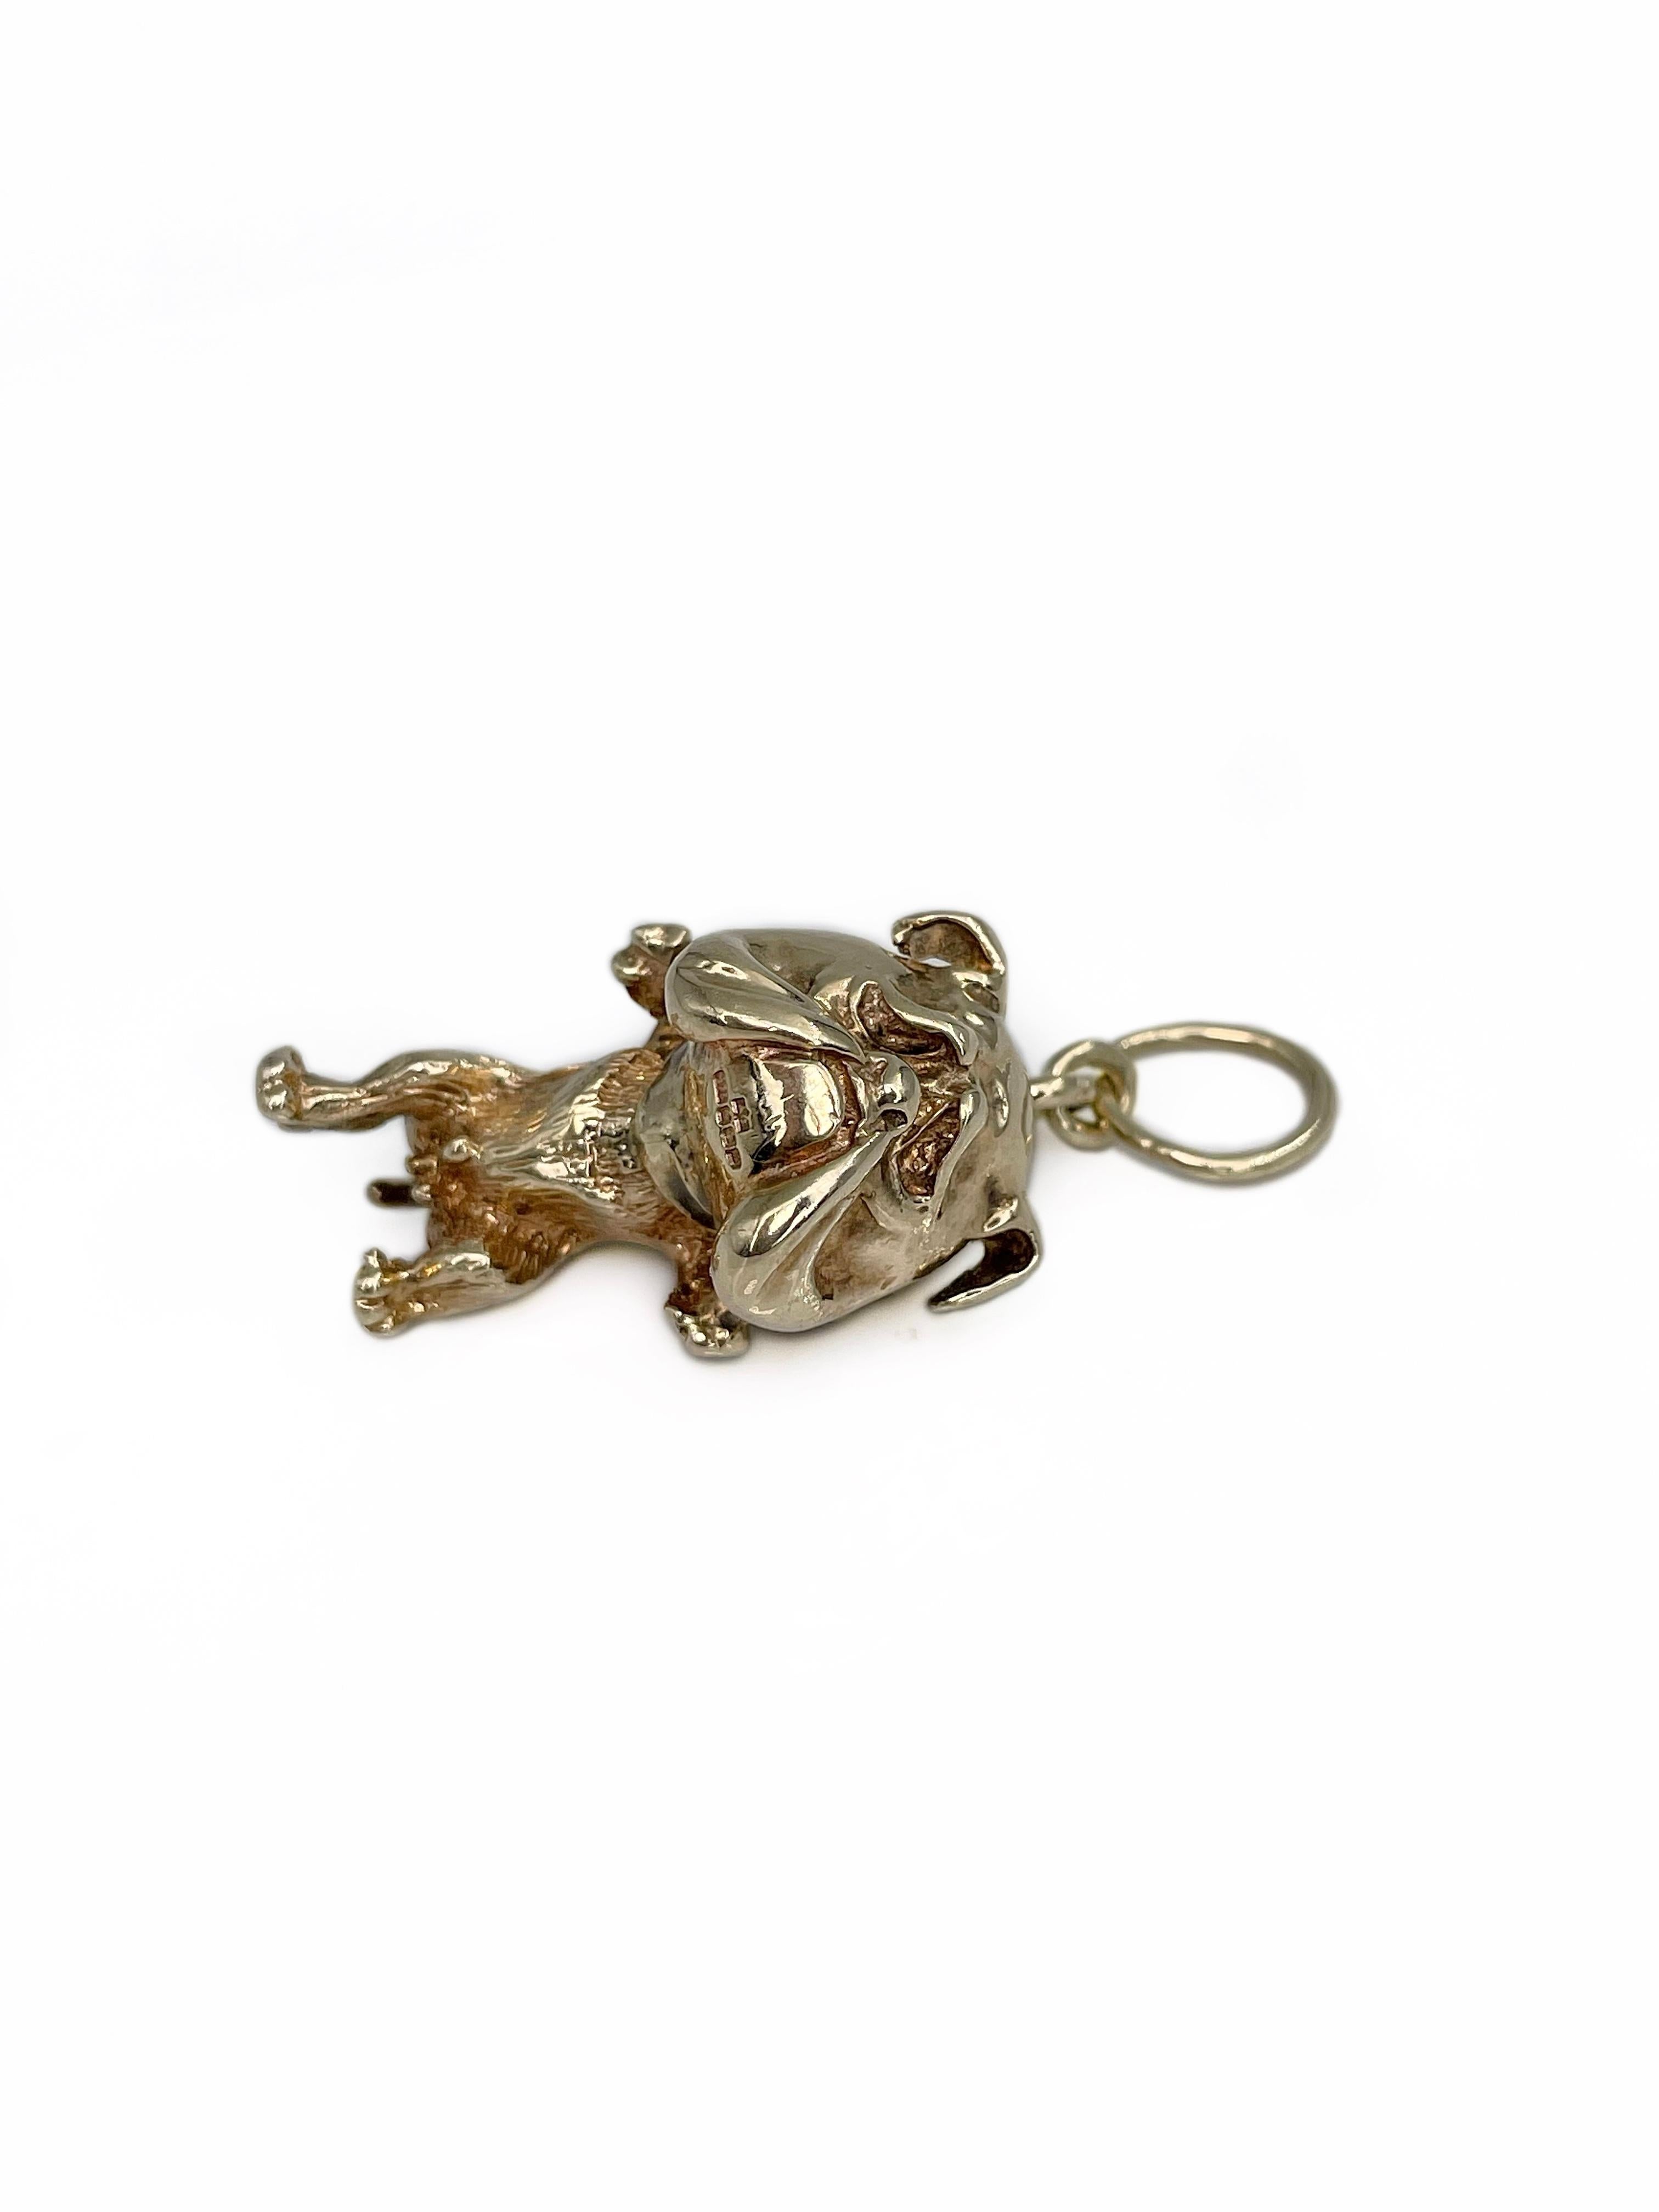 This is a vintage large bulldog charm pendant crafted in 9K slightly yellow gold. The piece is very detailed. 

Circa 1990.

Weight: 16.95g
Length: 4.5cm

———

If you have any questions, please feel free to ask. We describe our items accurately.